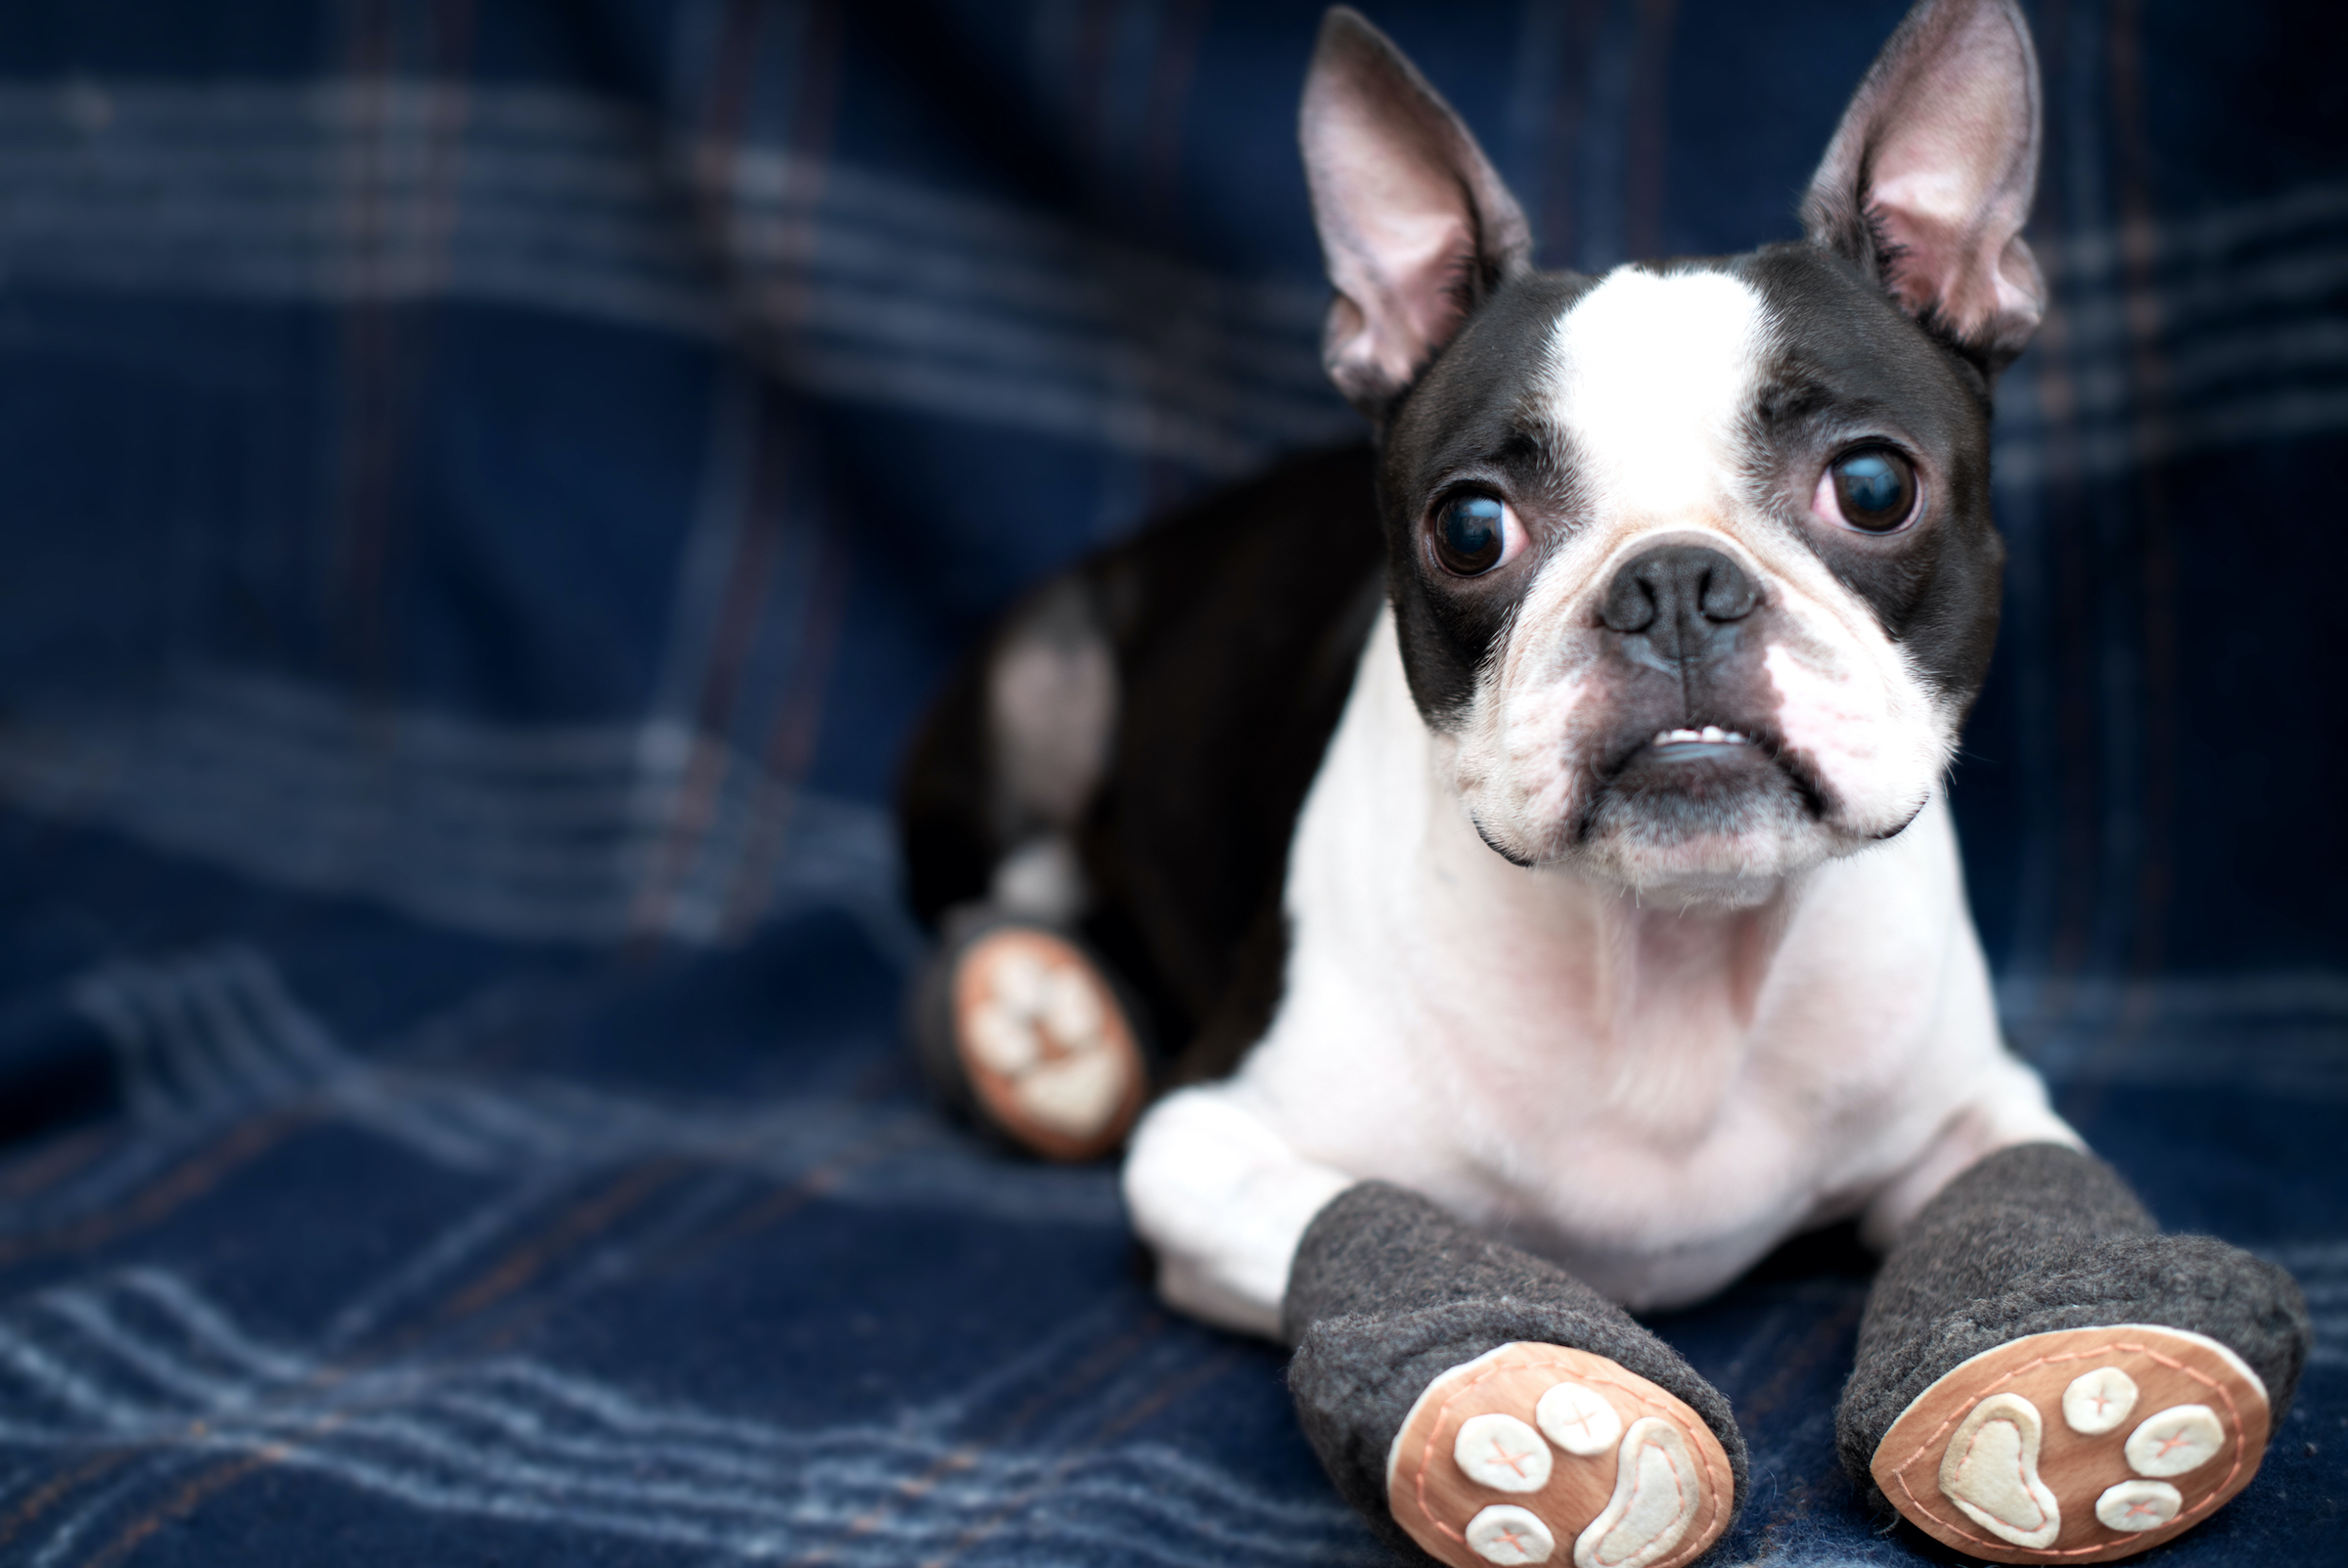 a boston terrier wearing booties lies on a blue plaid blanket